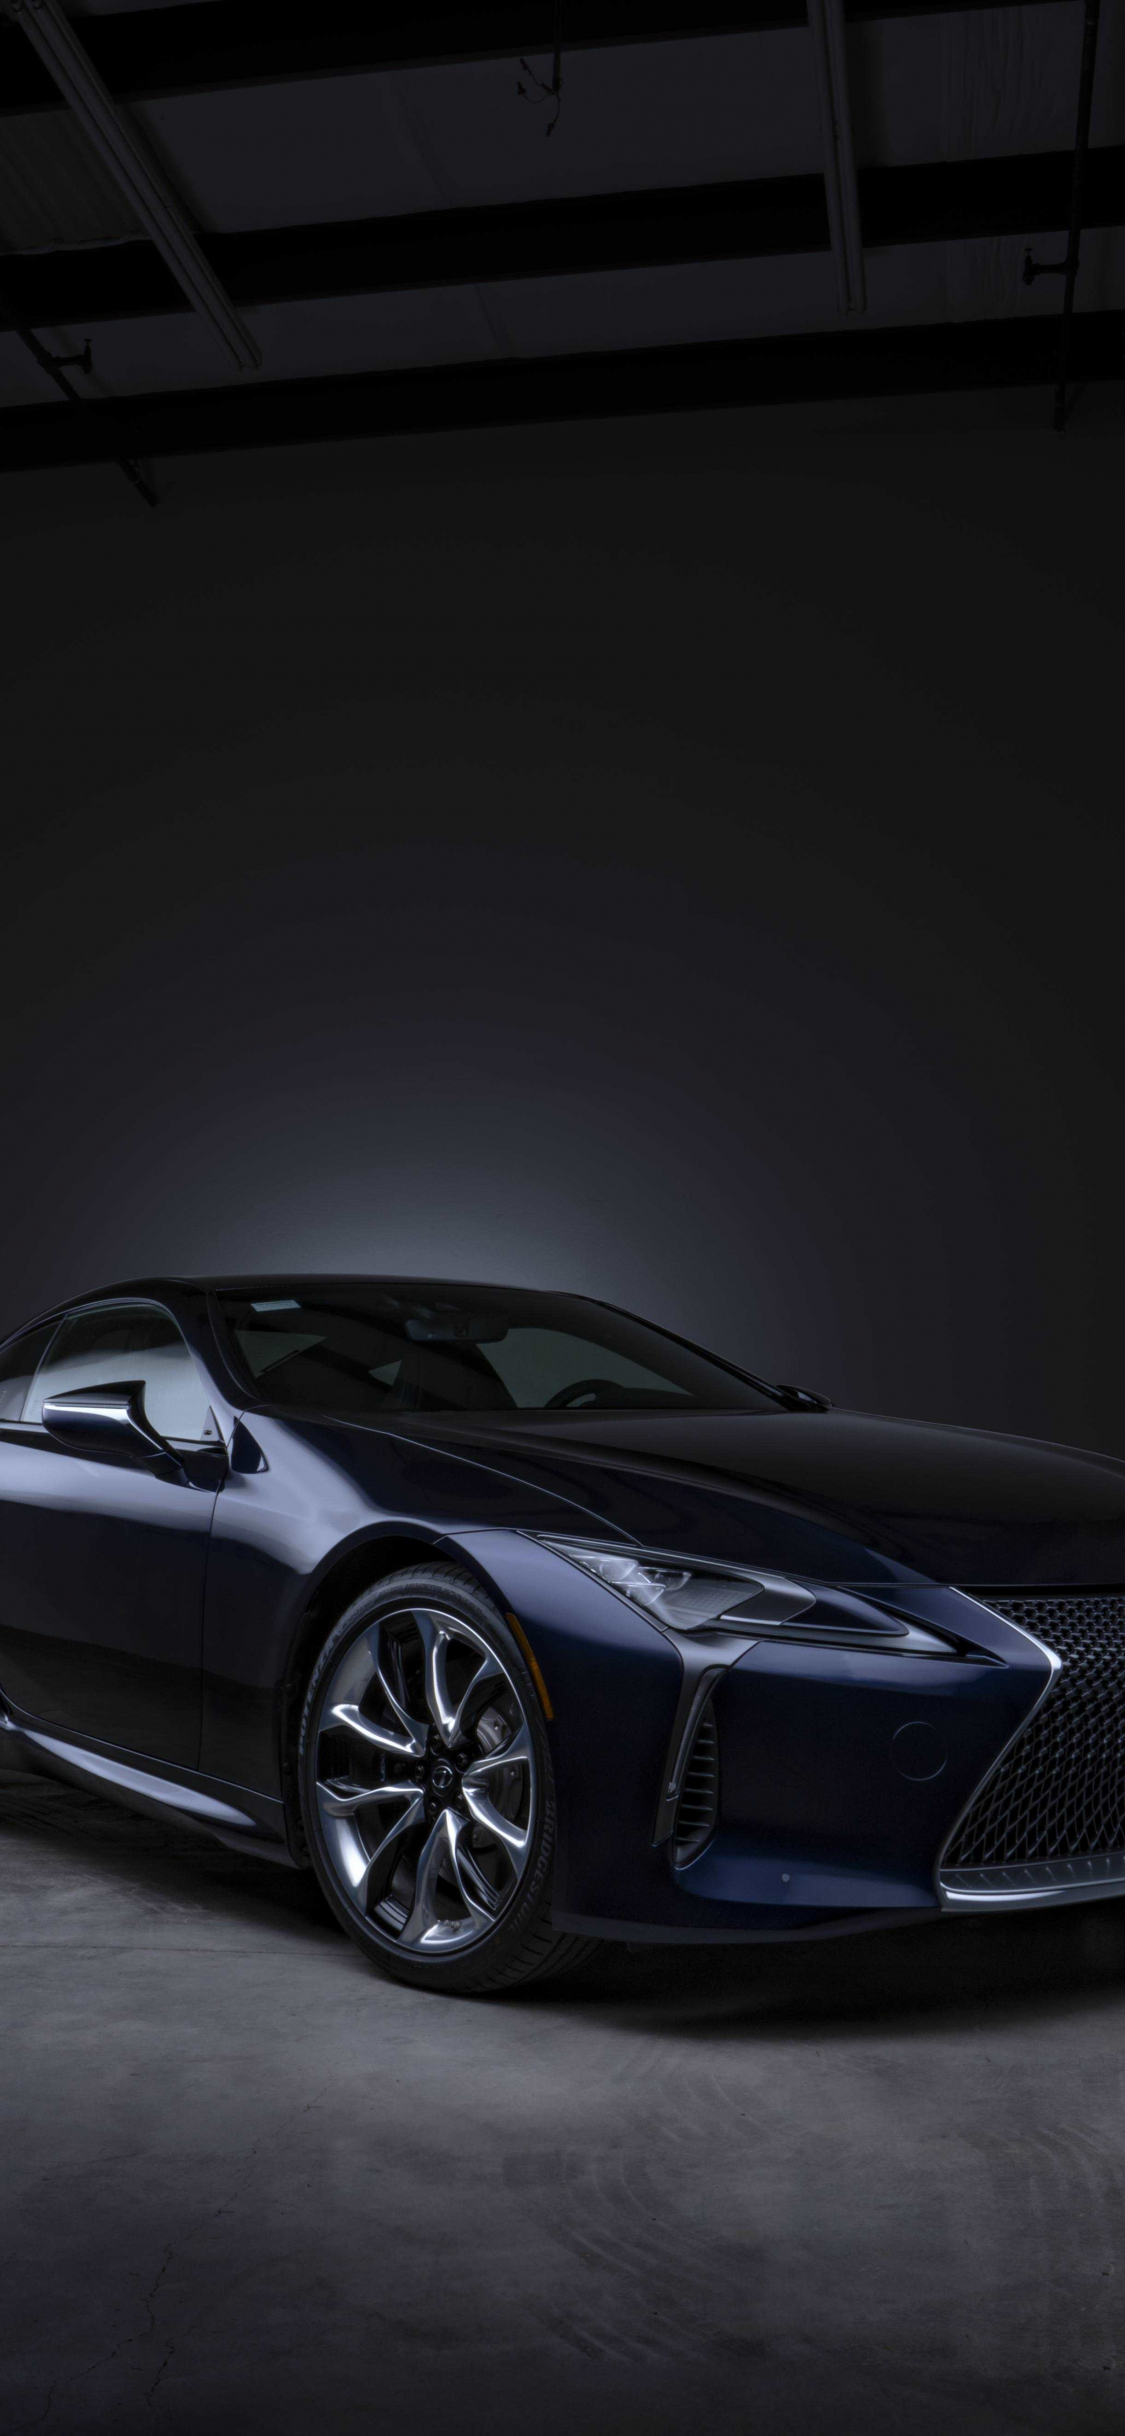 Download 1125x2436 Wallpaper Lexus Black Panther Lc 500 Front Iphone X 1125x2436 Hd Image Background 3107